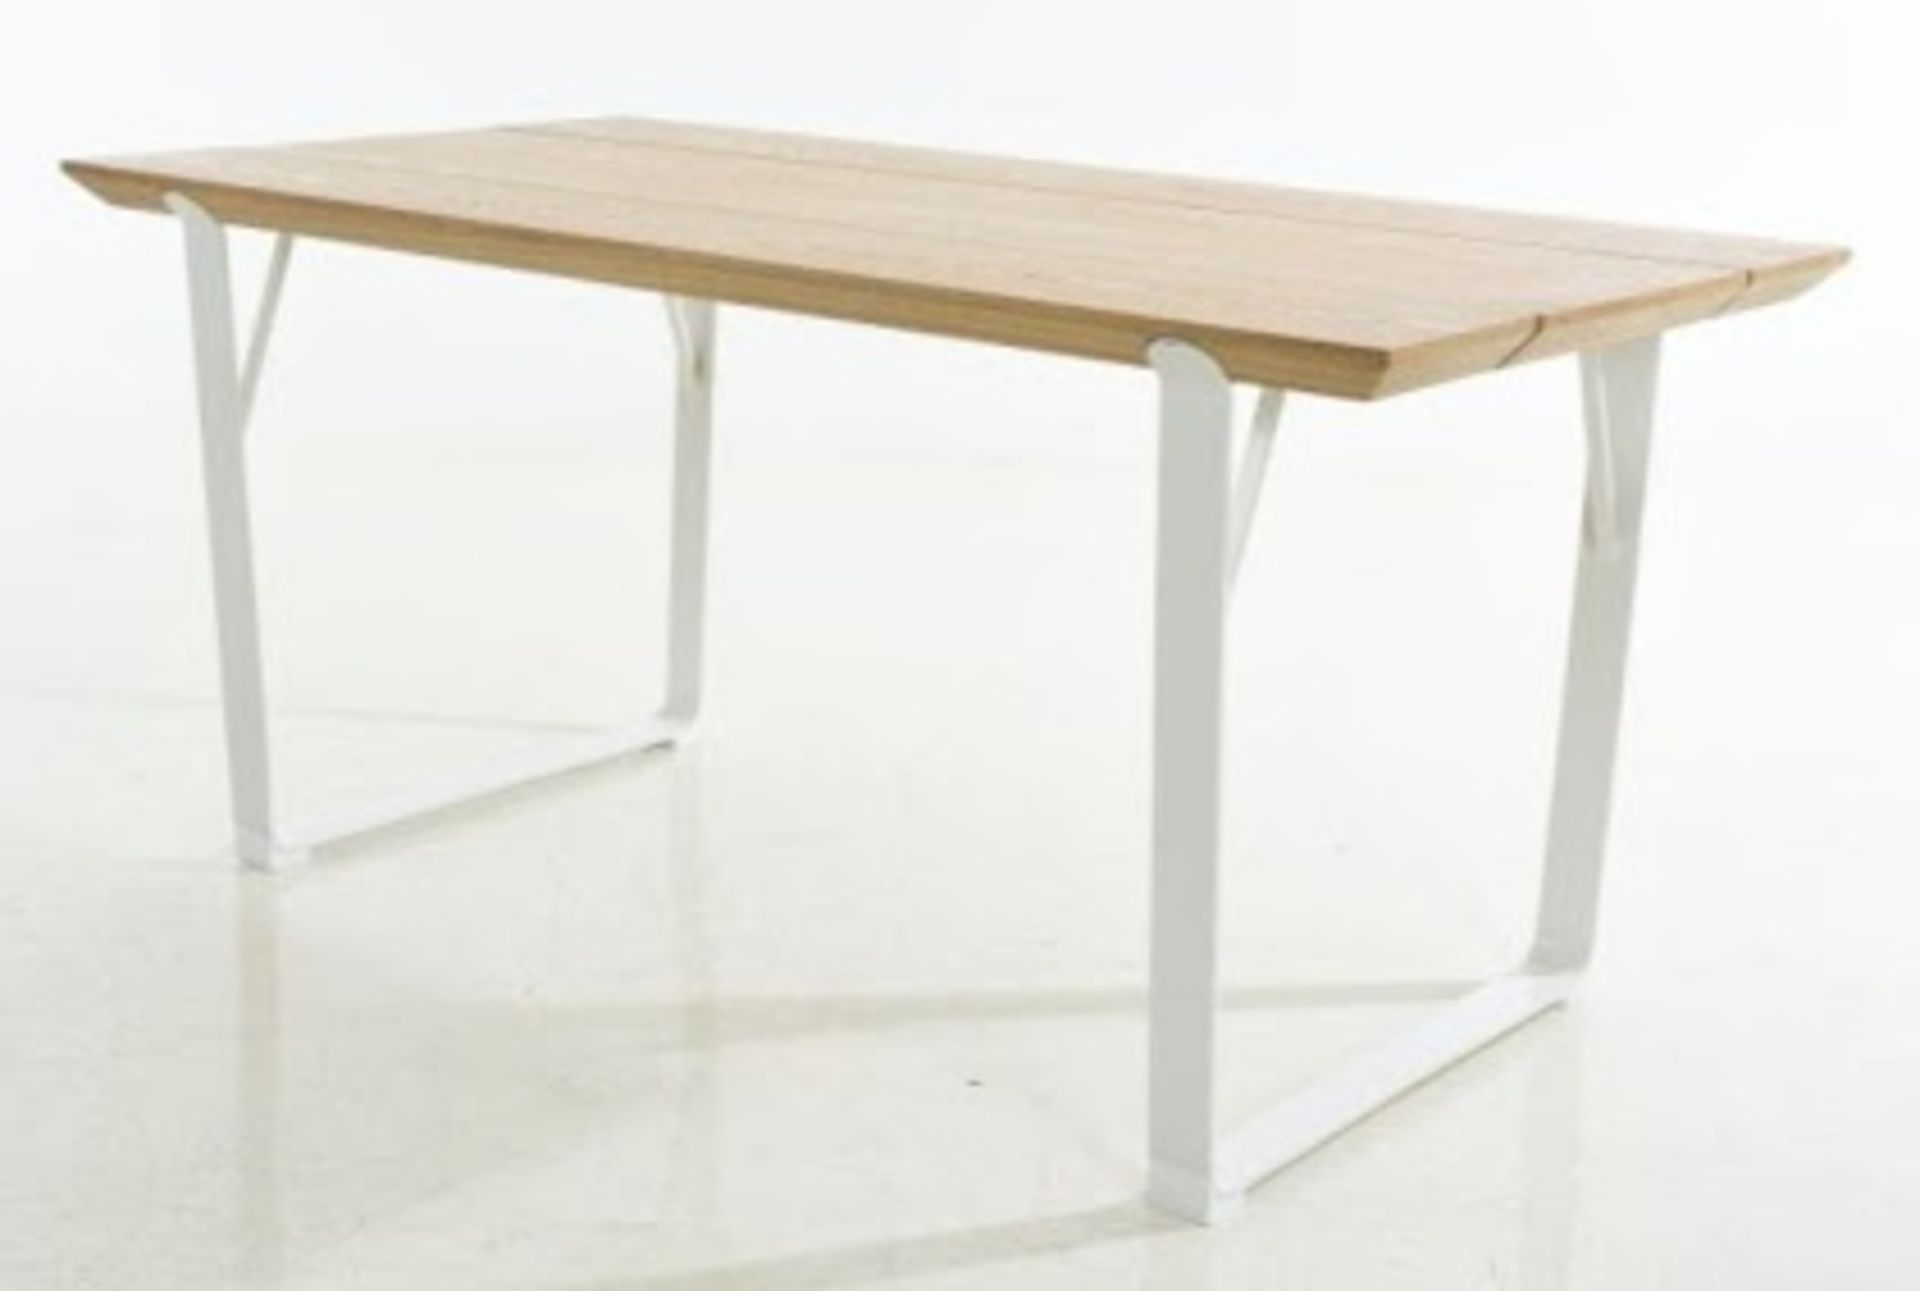 1 x Battersea Scandinavian Style Dining Table - Featuring A Natural Ash Wood Top With White Metal